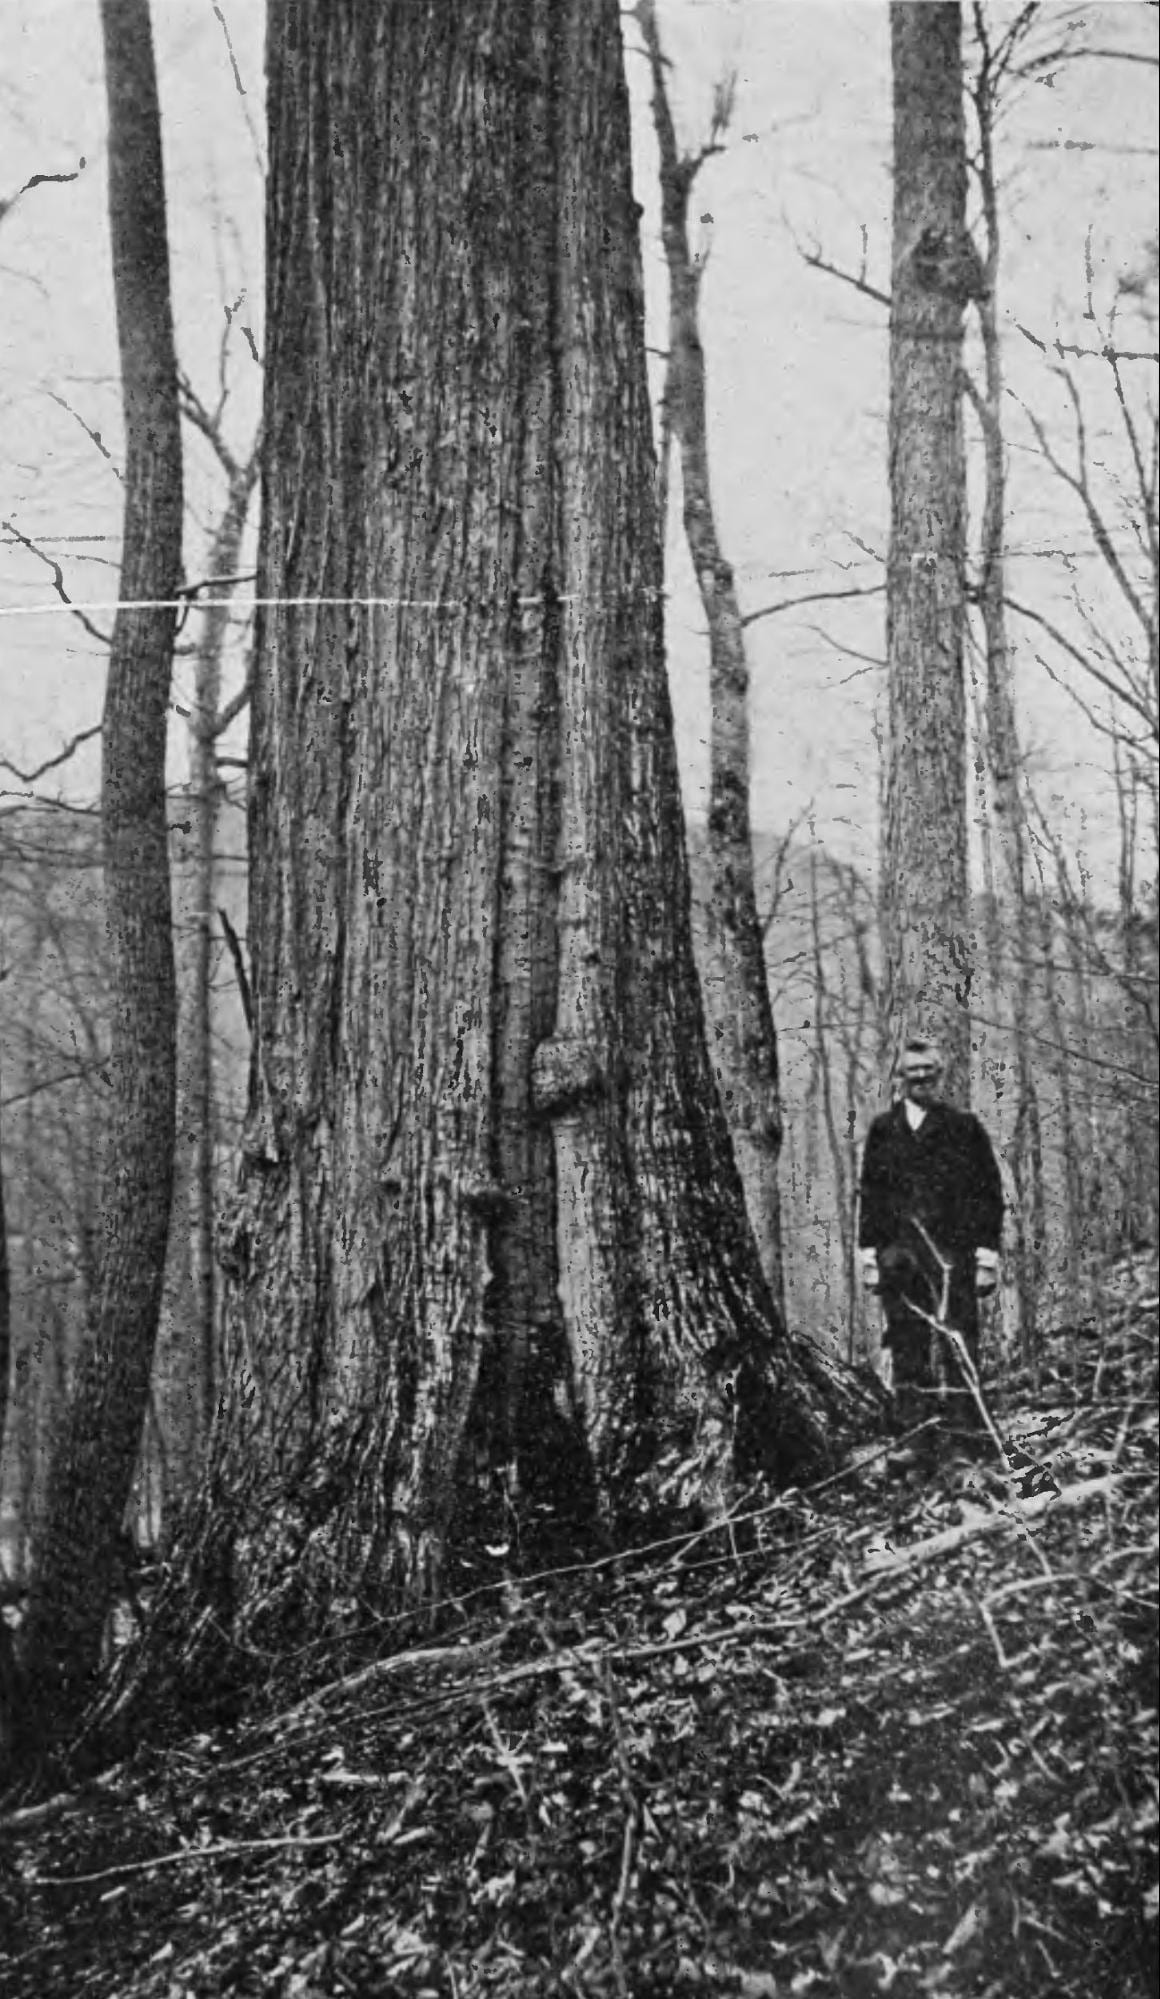 American Chestnut, Mitchell County, North Carolina, 1914. Photograph supplied by the United States Forest Service. [Public domain: Arthur H. Graves: The future of the chestnut tree in North America. The Popular science monthly, Volume 84, p561. New York, Popular Science Pub. Co., June 1914. Online: archive.org.]